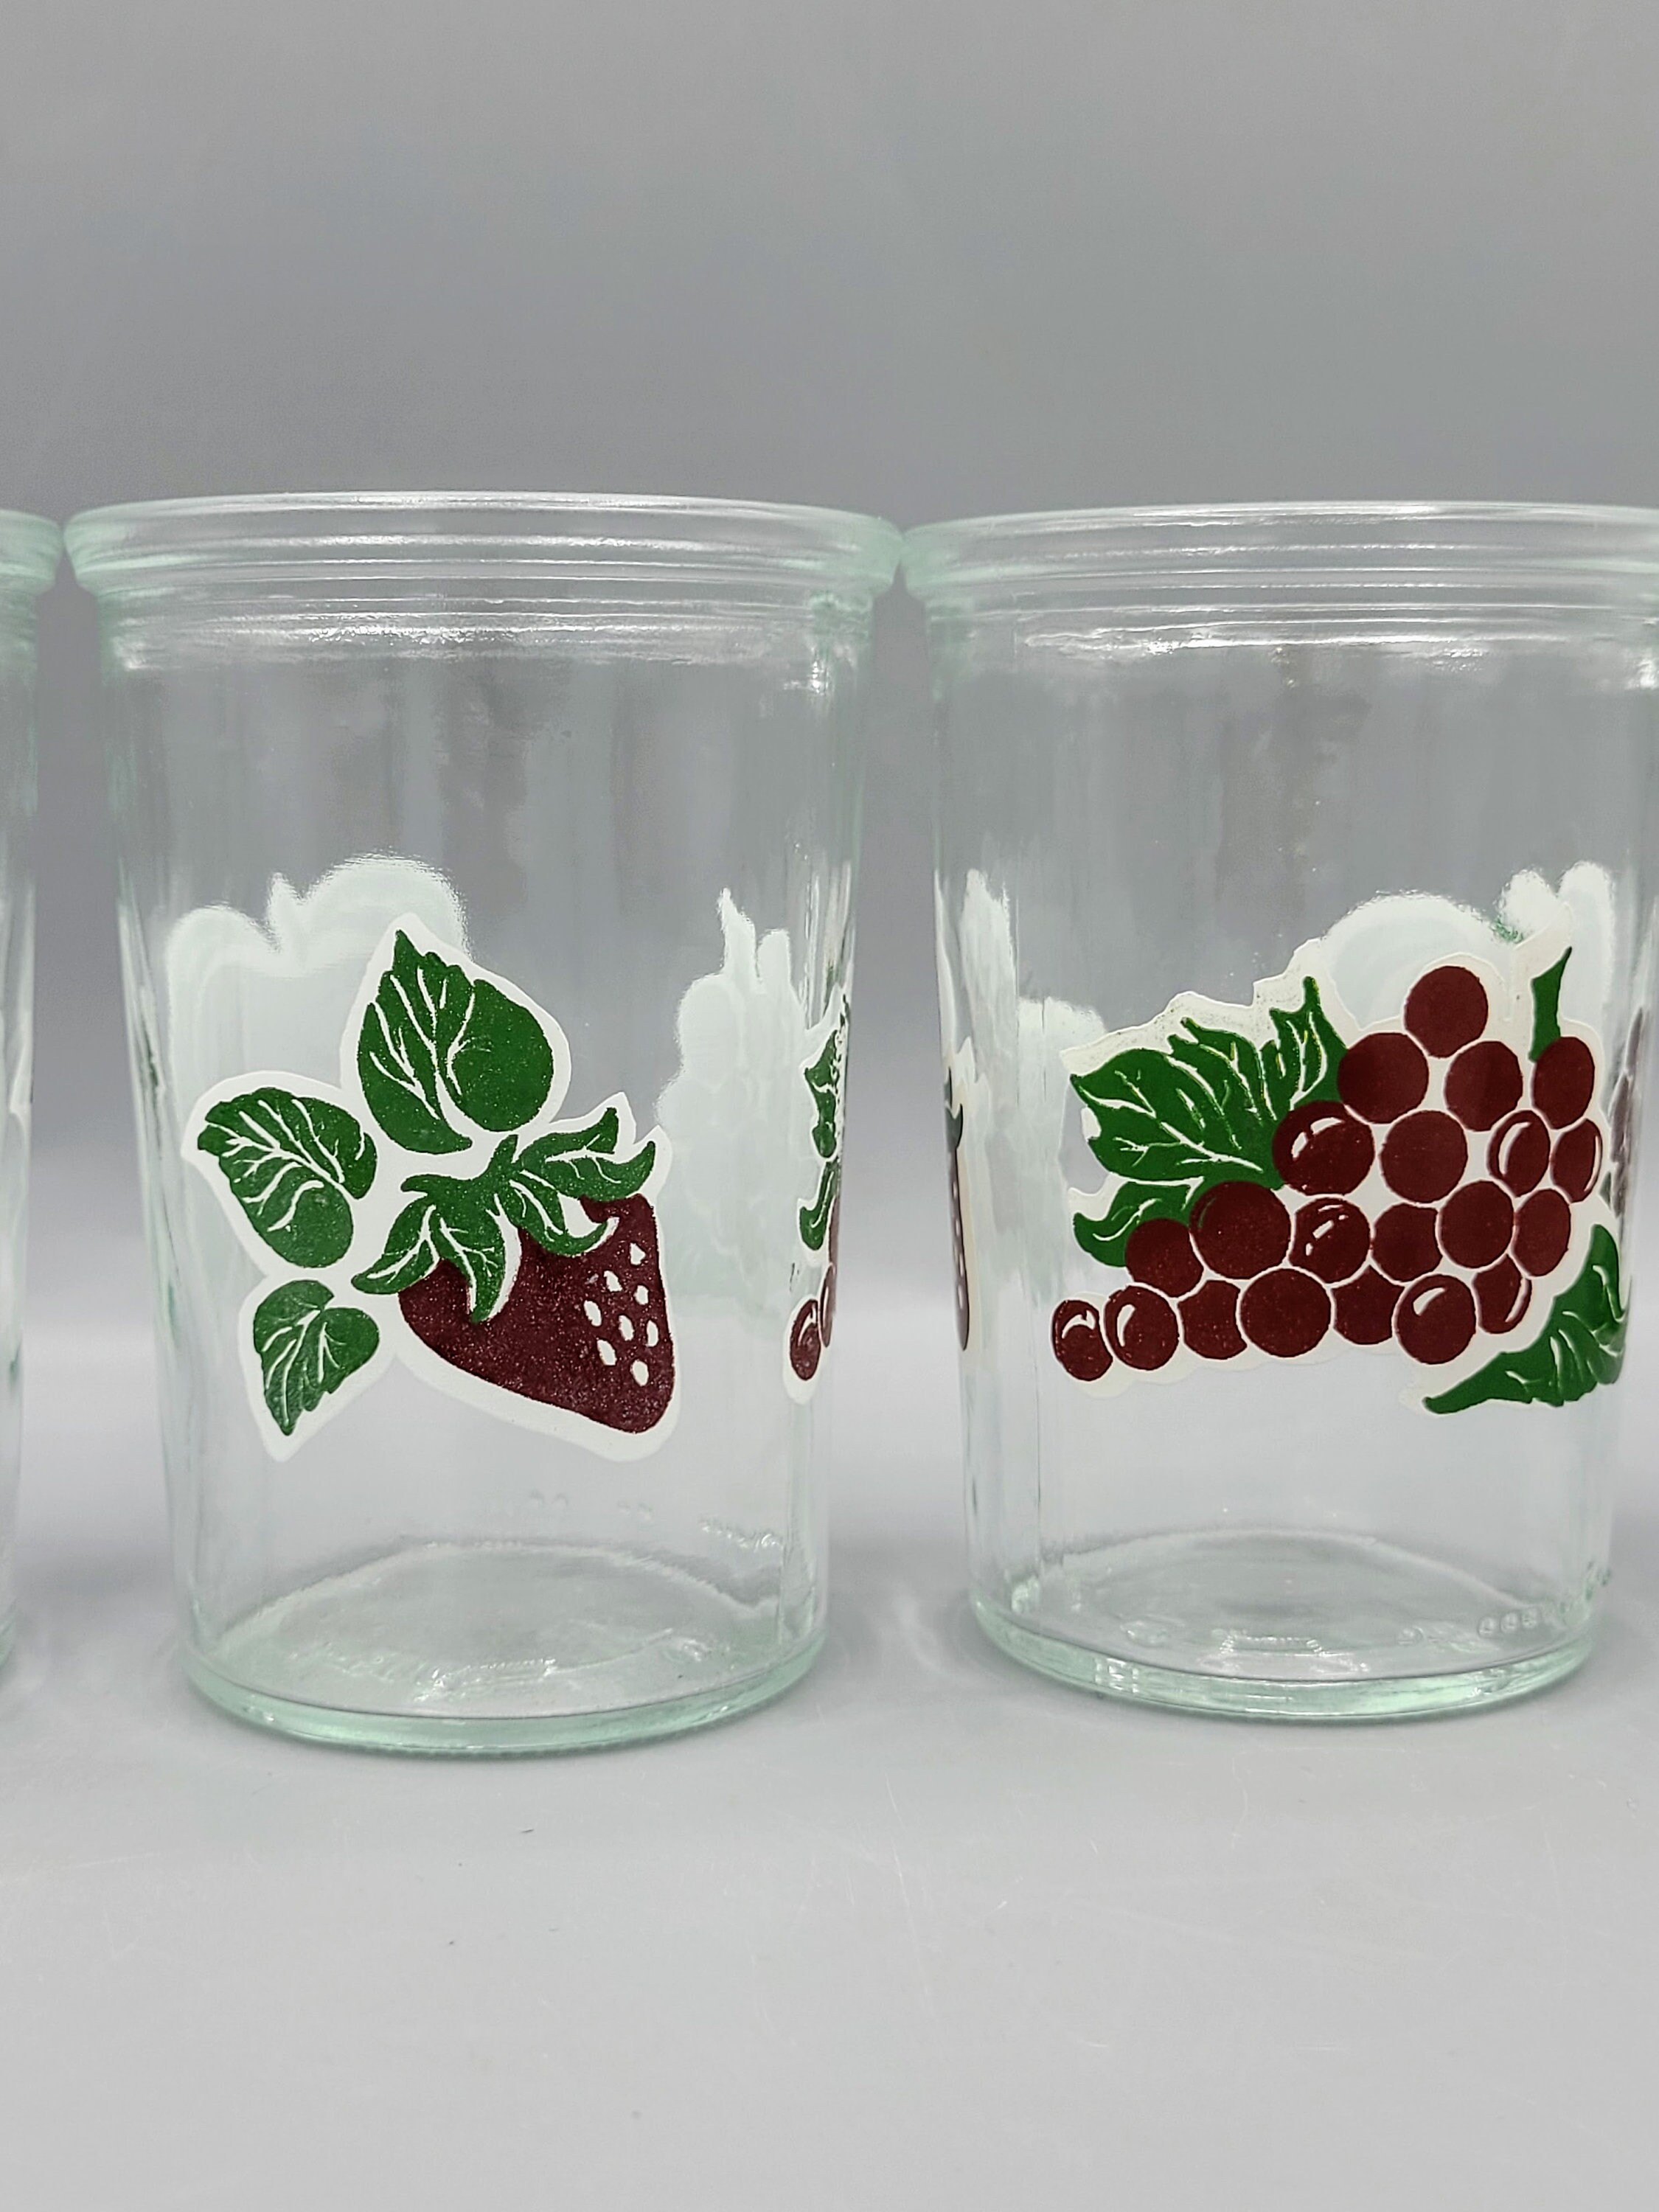 Thick Diamond Quilted Jelly Jar Drinking Glasses Set of 4 Everyday Use Iced  Tea Tumblers, Coolers Retro Country Pastoral Farmhouse Kitchen 